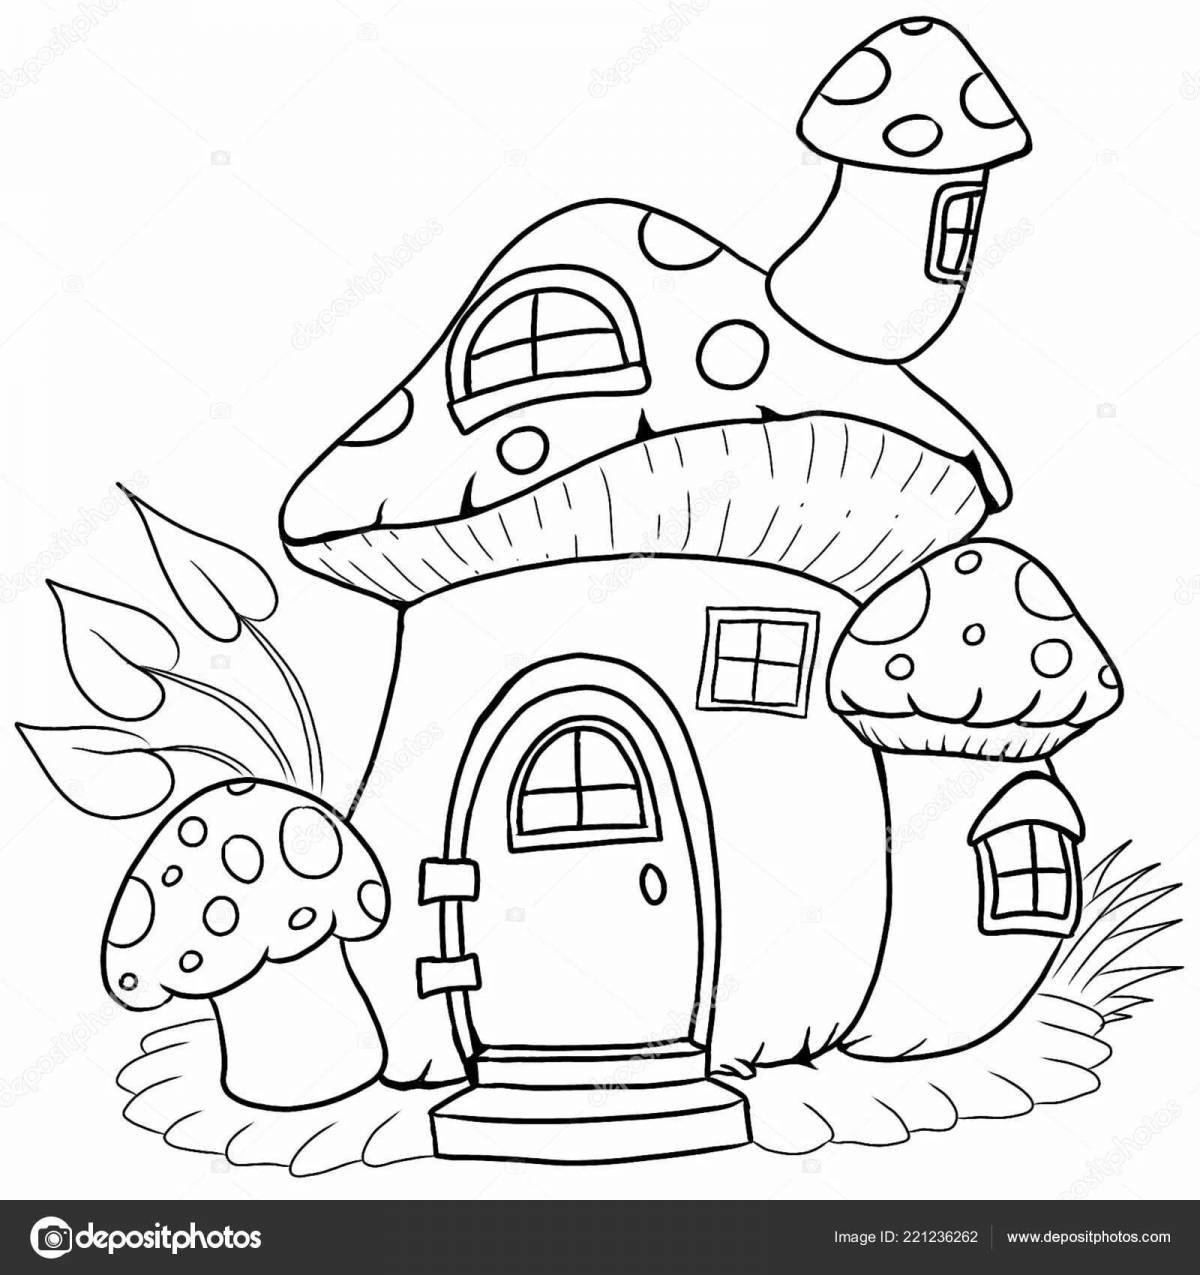 Amazing house coloring book